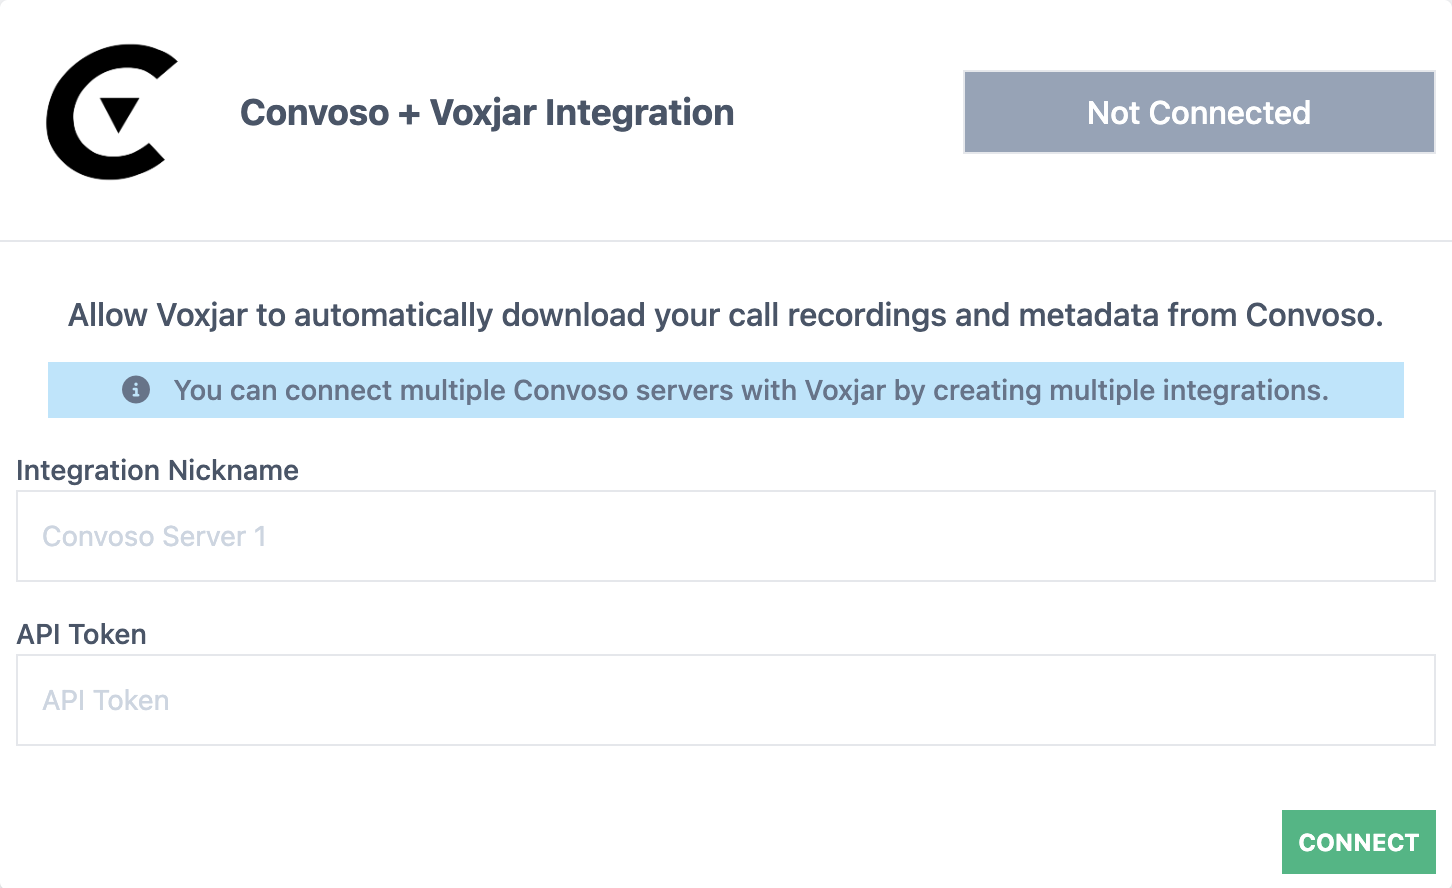 voxjar's convoso integration login screen for authorizing 3rd party apps